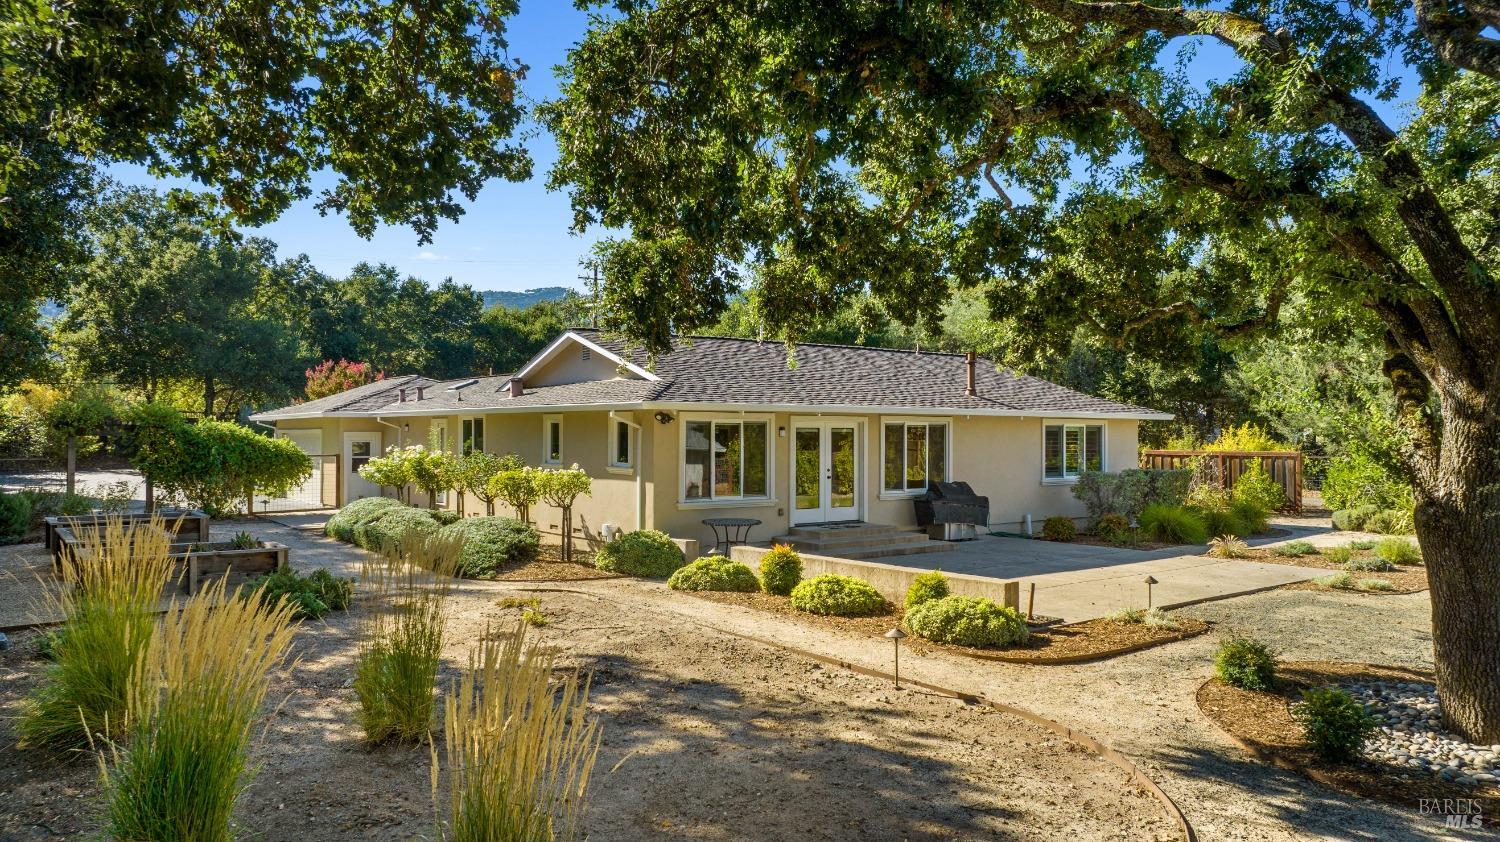 Photo of 17201 Arnold Dr in Sonoma, CA